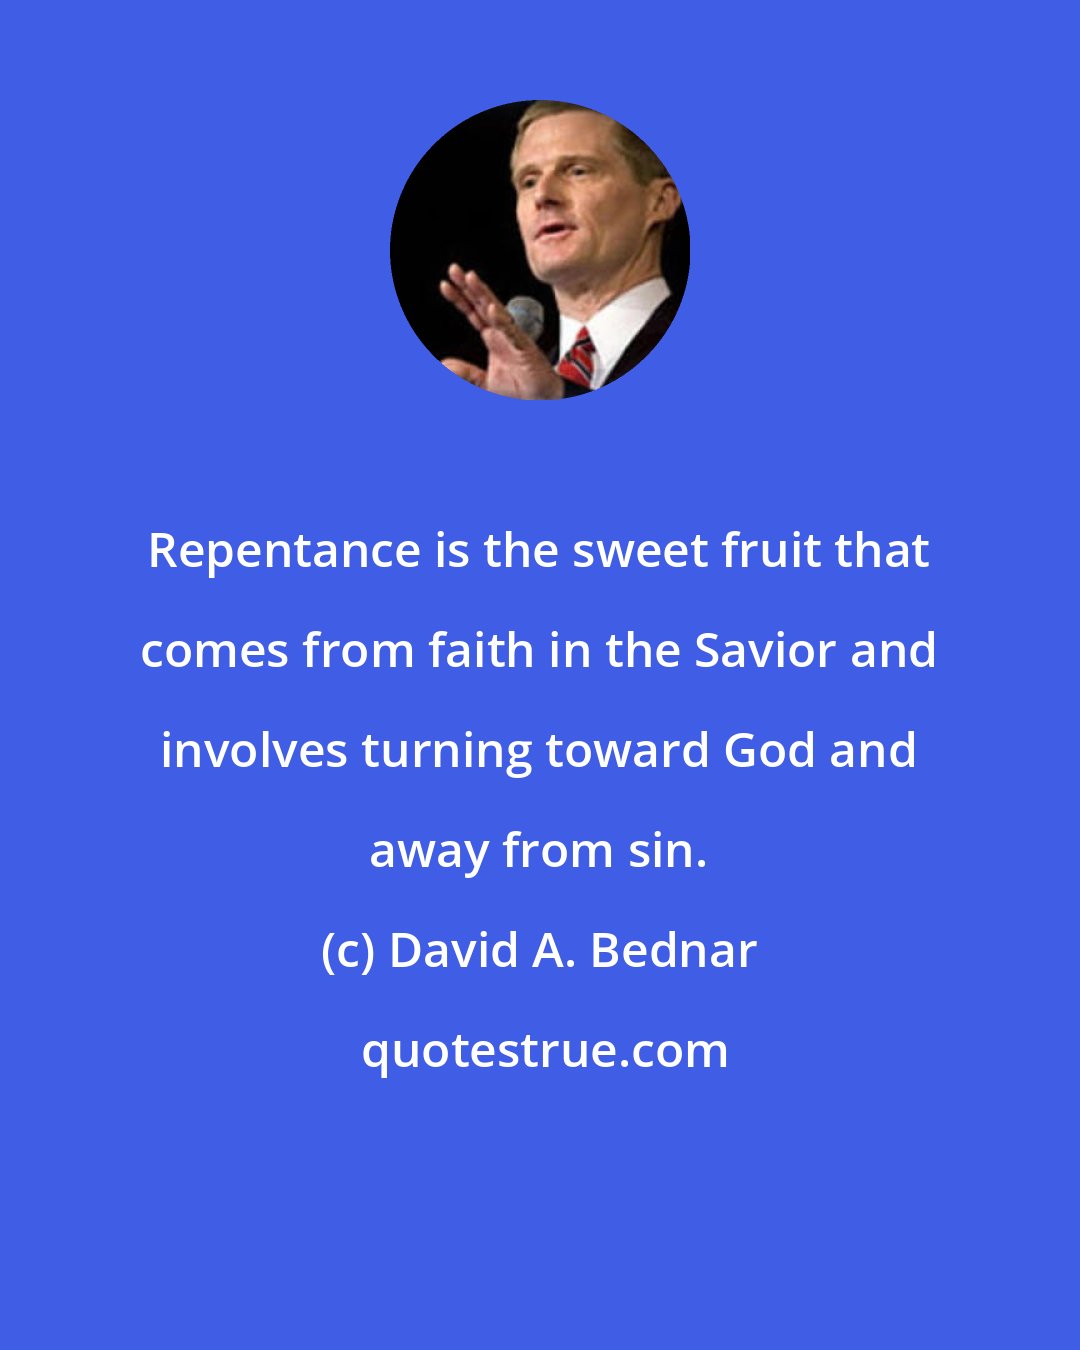 David A. Bednar: Repentance is the sweet fruit that comes from faith in the Savior and involves turning toward God and away from sin.